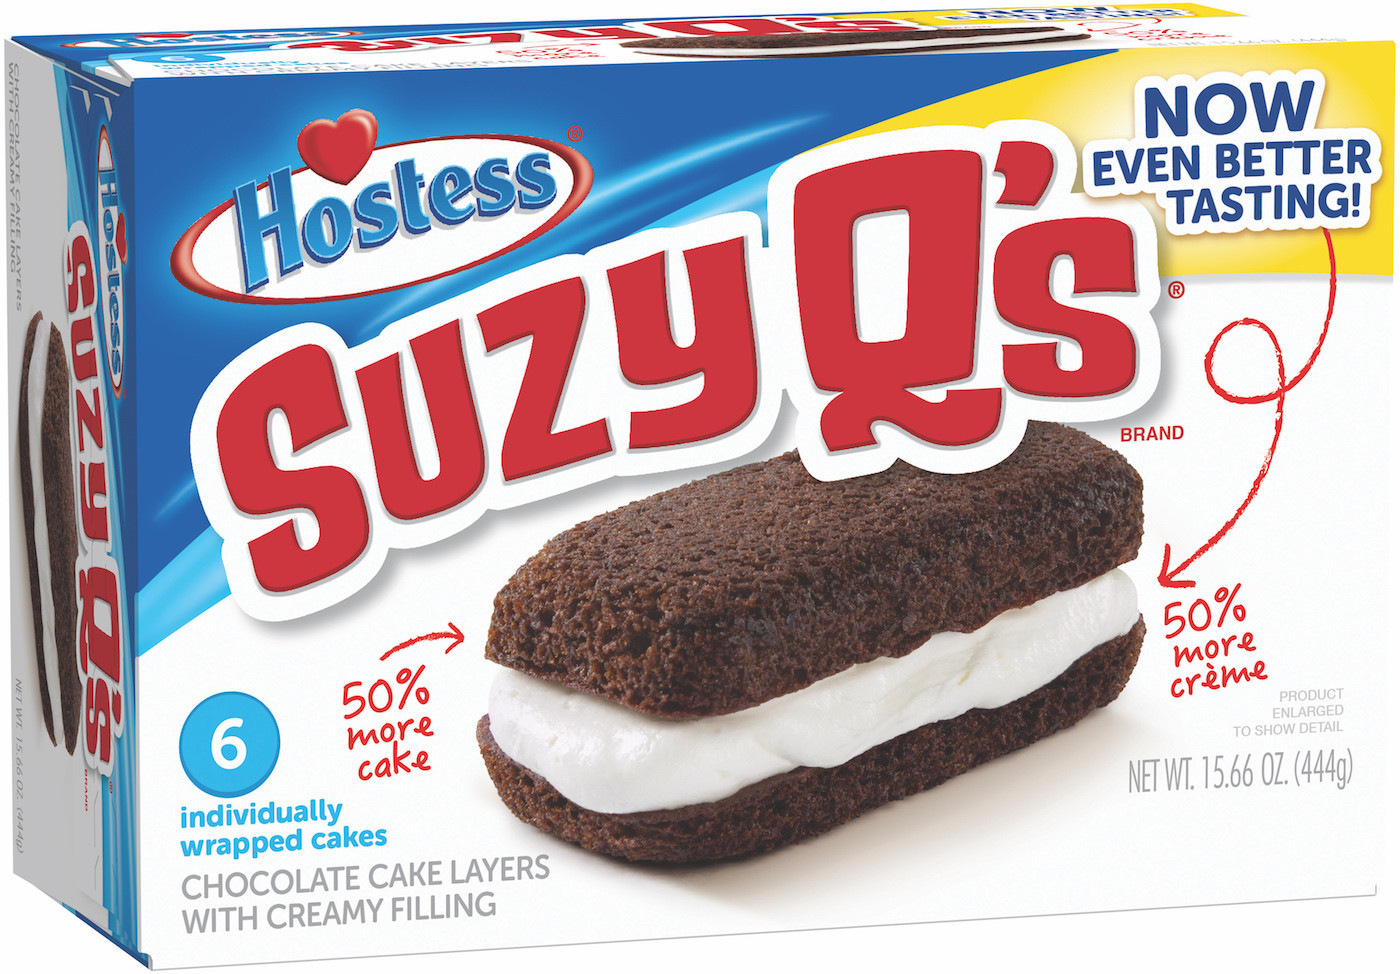 Hostess has relaunched fanfavorite snack cake Suzy Q's